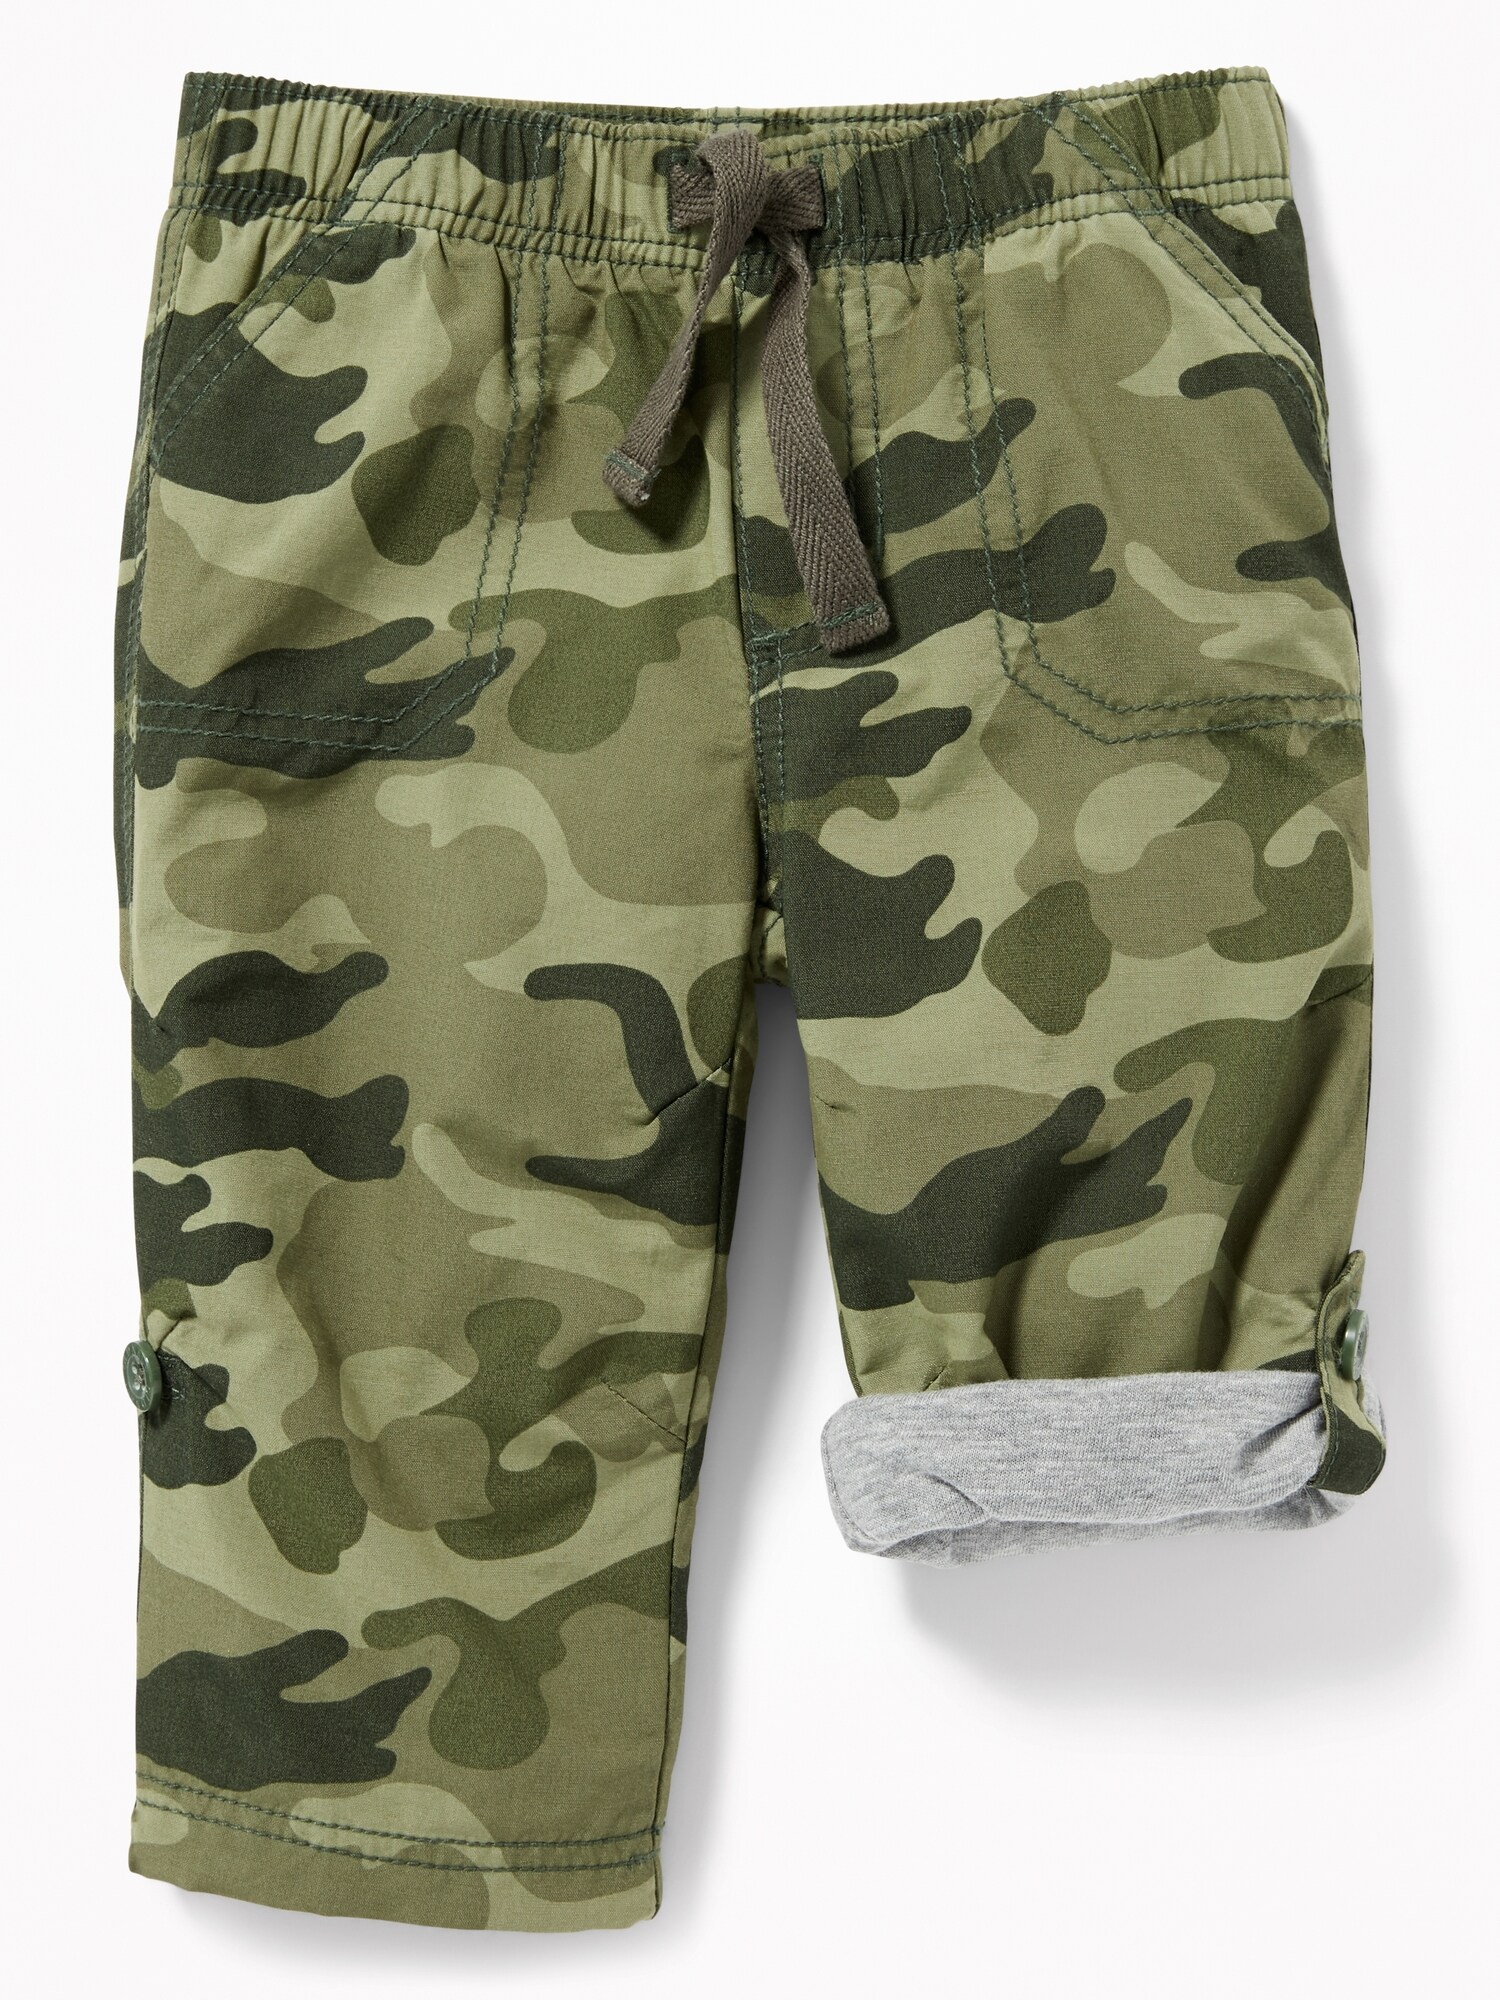 Jersey-Lined Pull-On Hybrid Pants for Baby | Old Navy